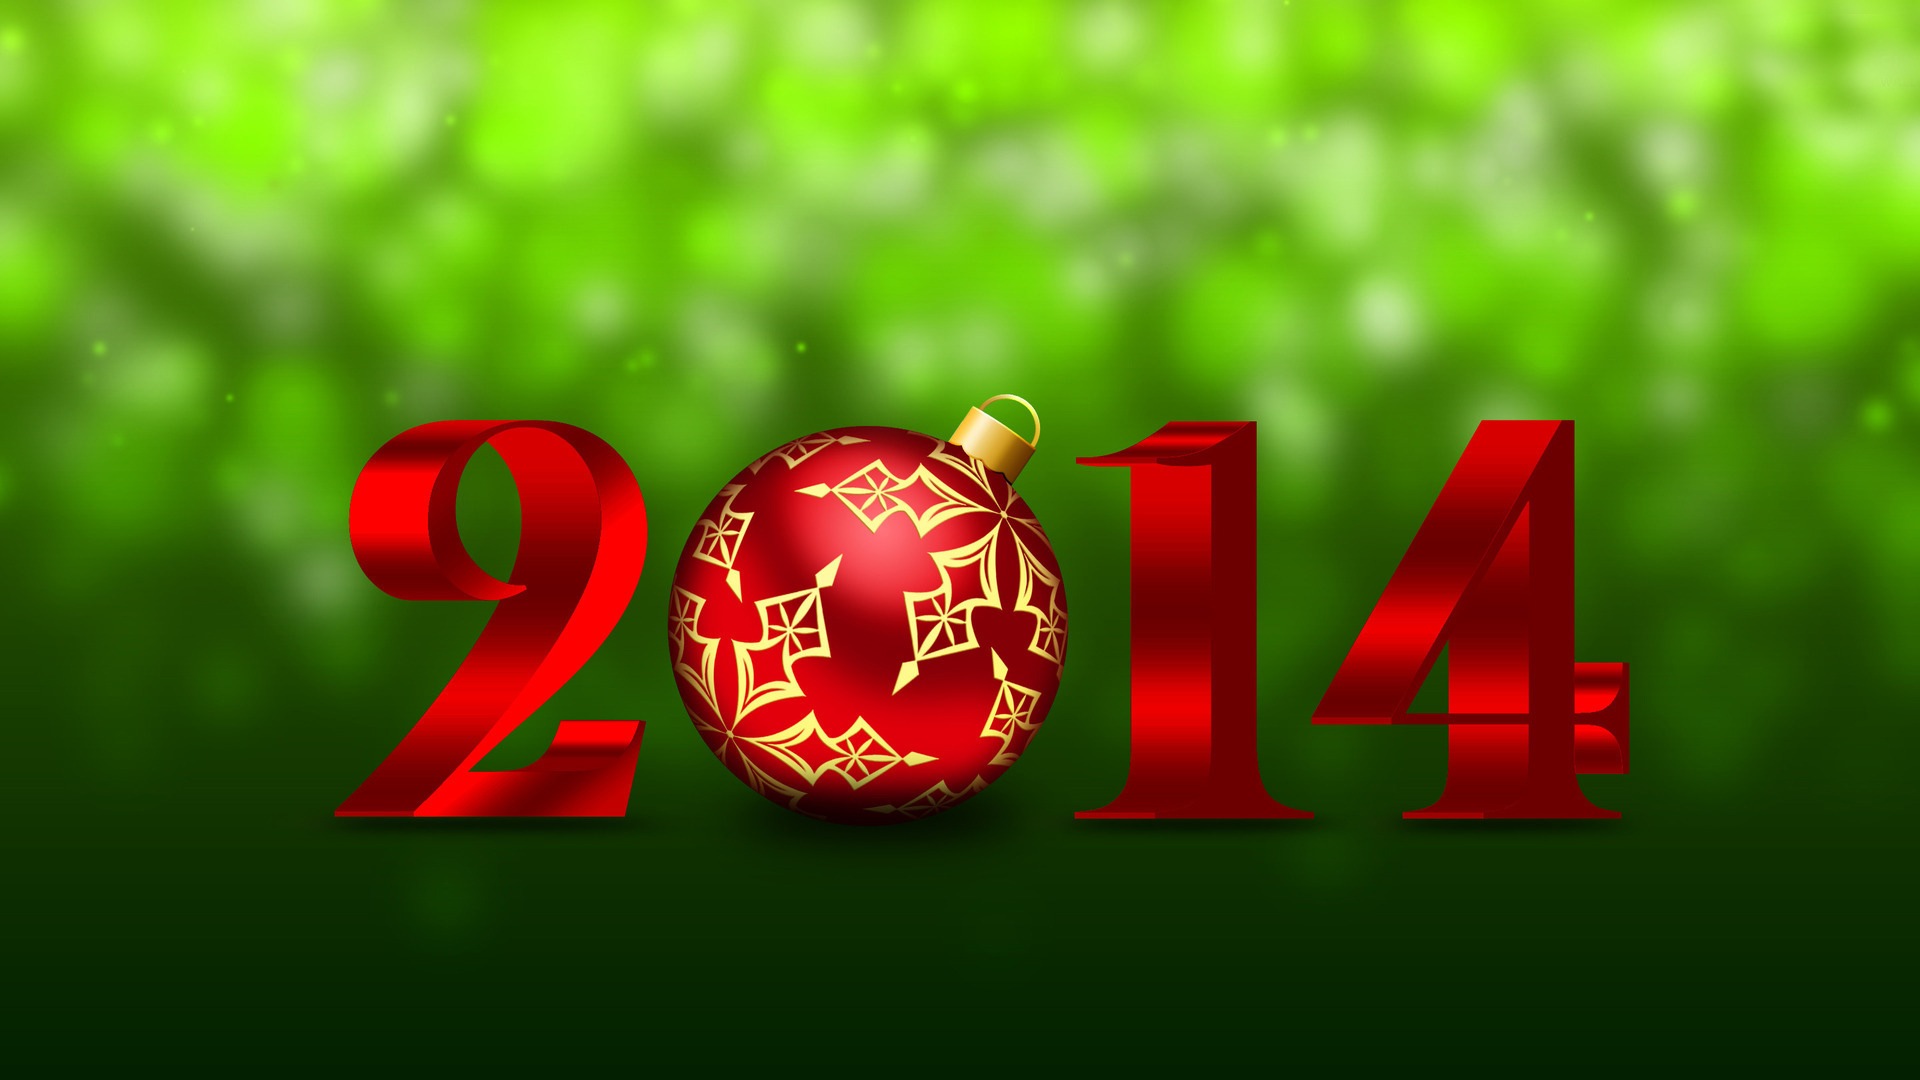 2014 New Year Theme HD Wallpapers (1) #3 - 1920x1080